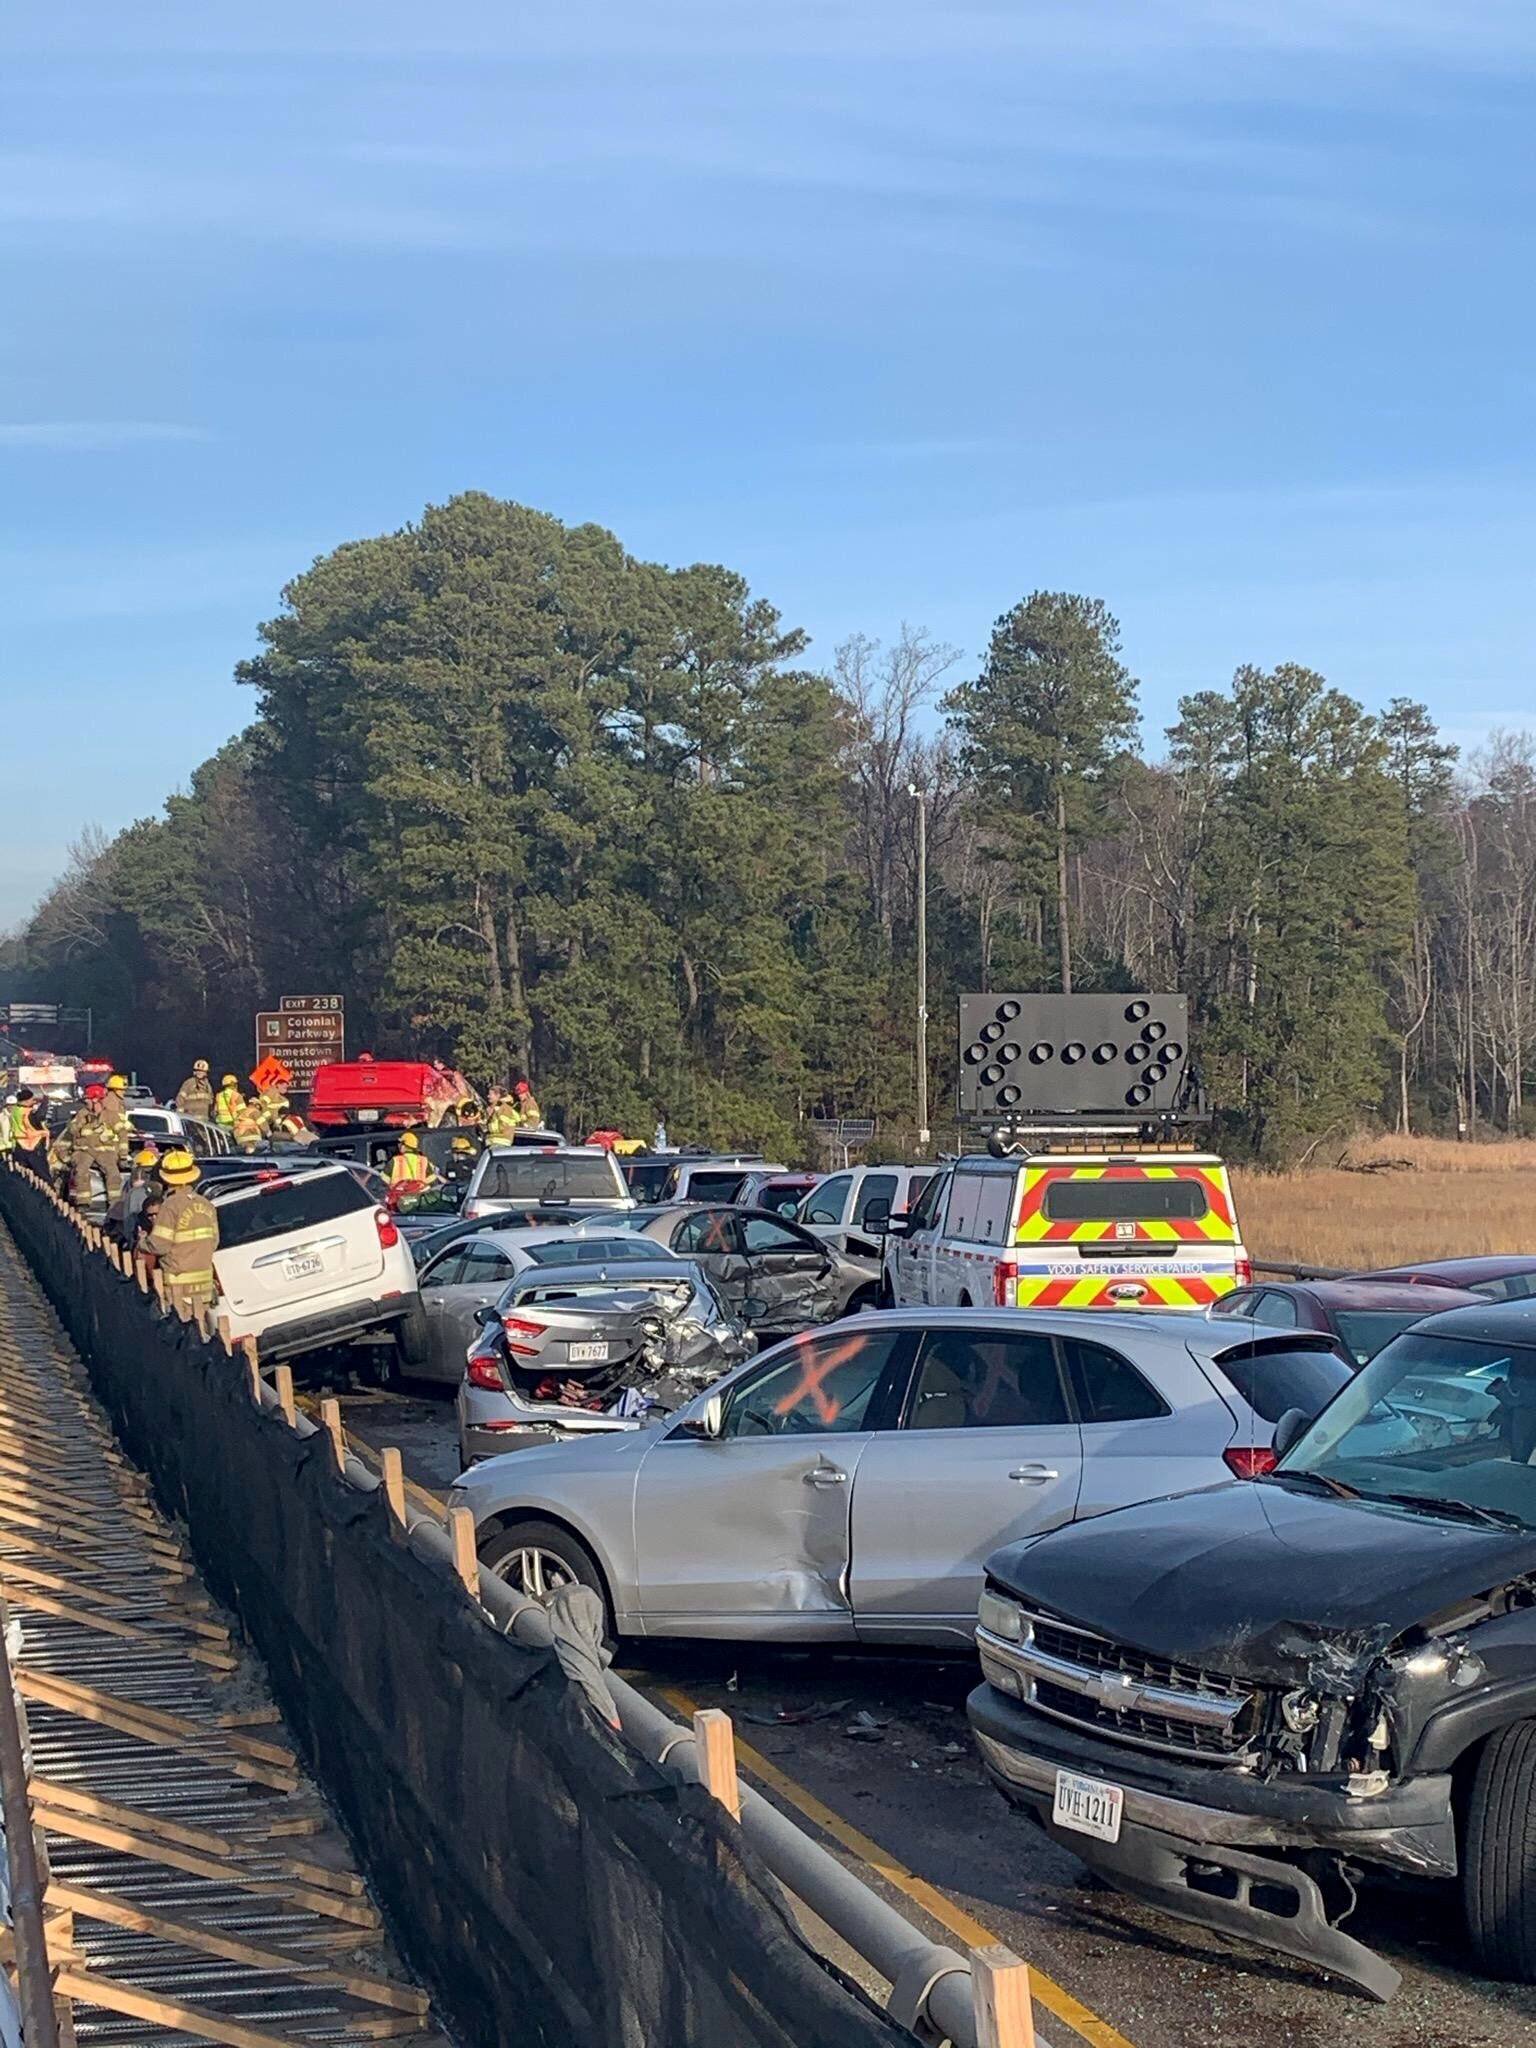 Damaged vehicles are seen after a chain reaction crash on I-64 in York County, Virginia